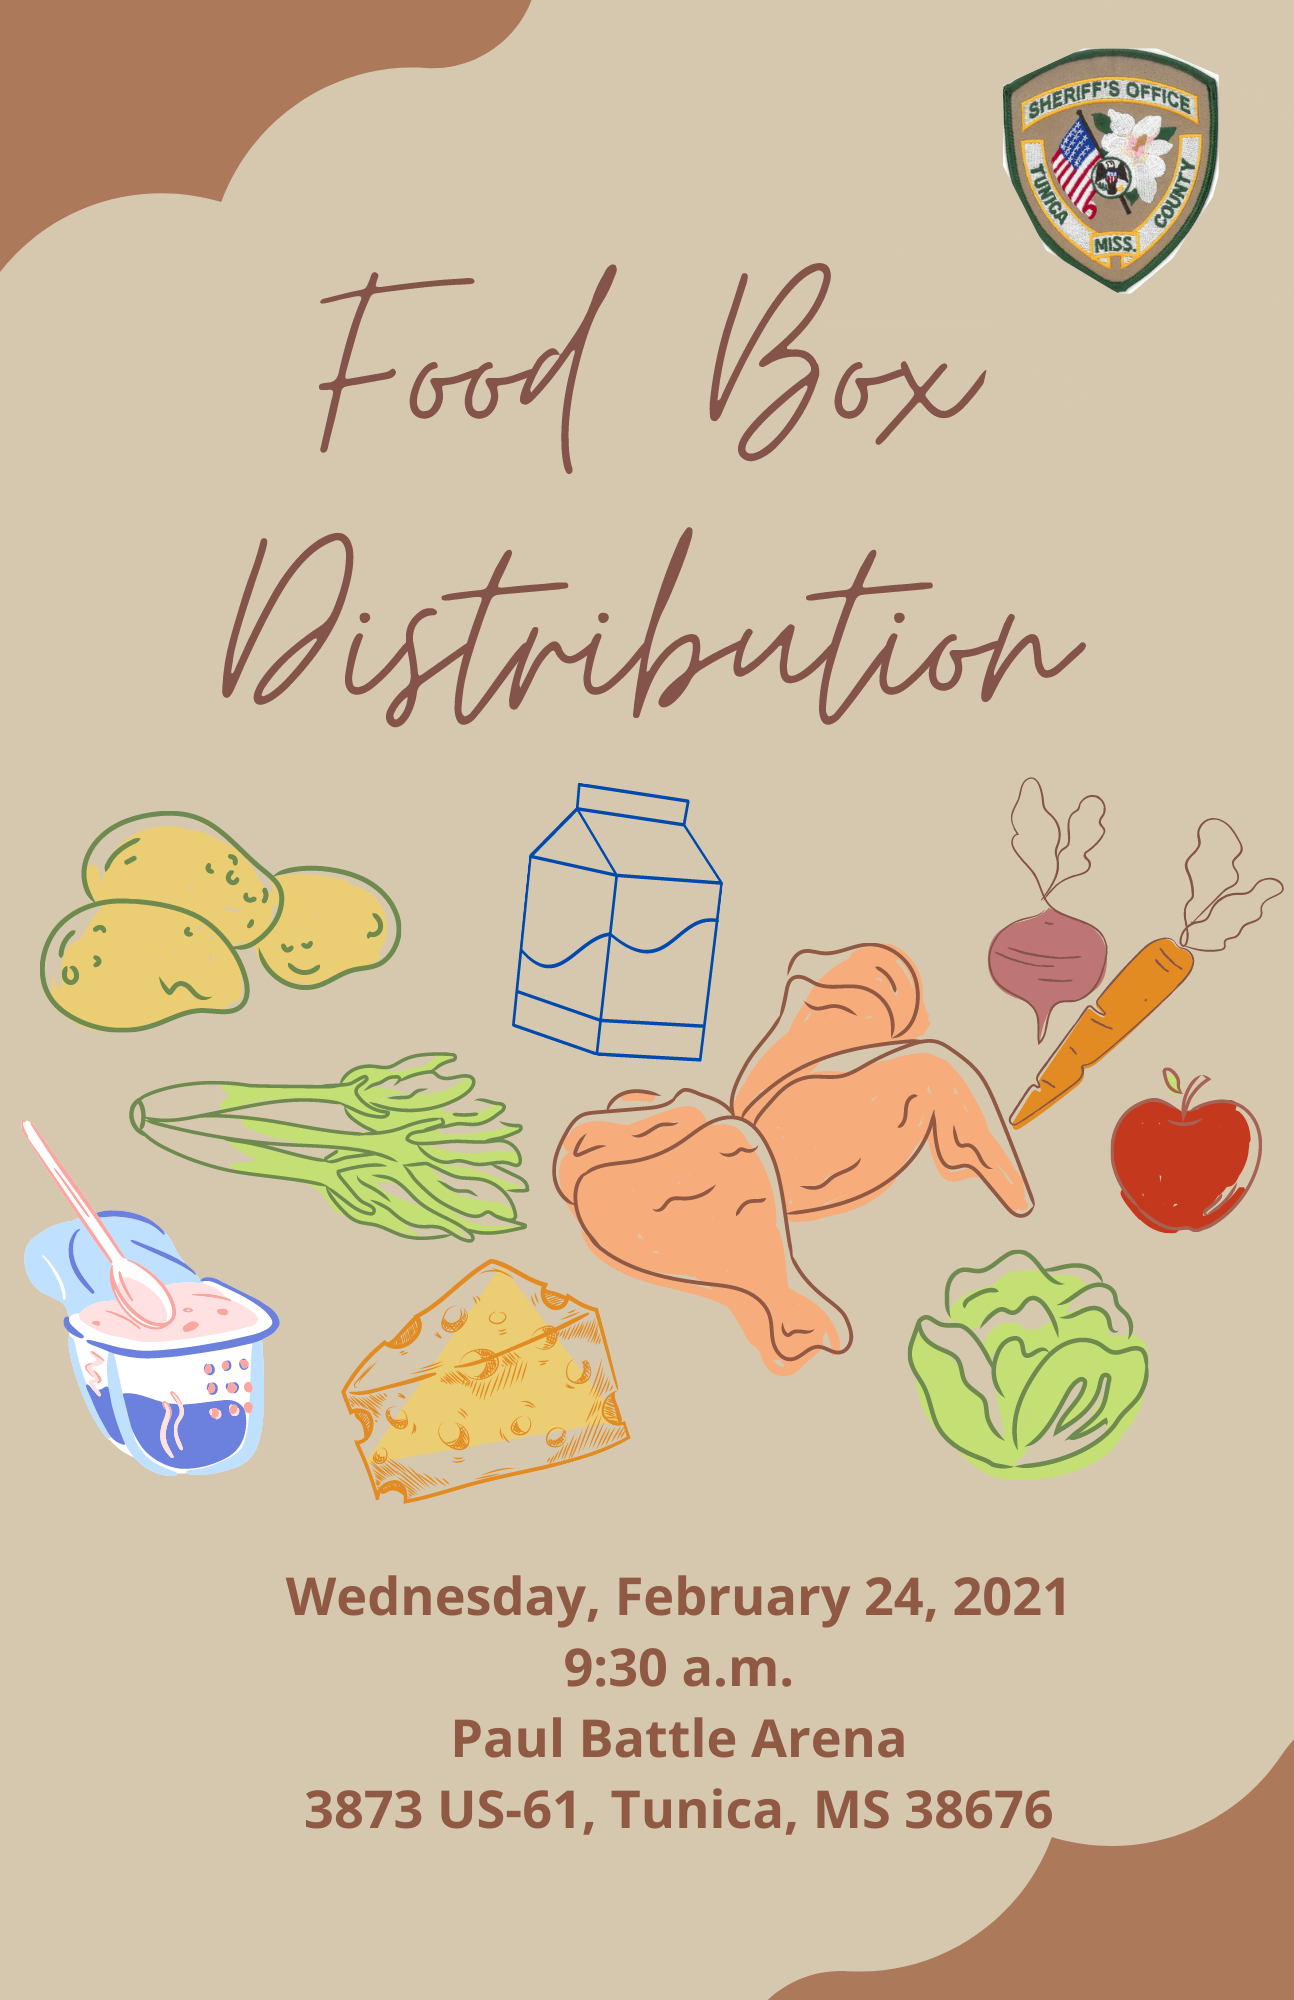 Food Box Distribution flyer - info listed above